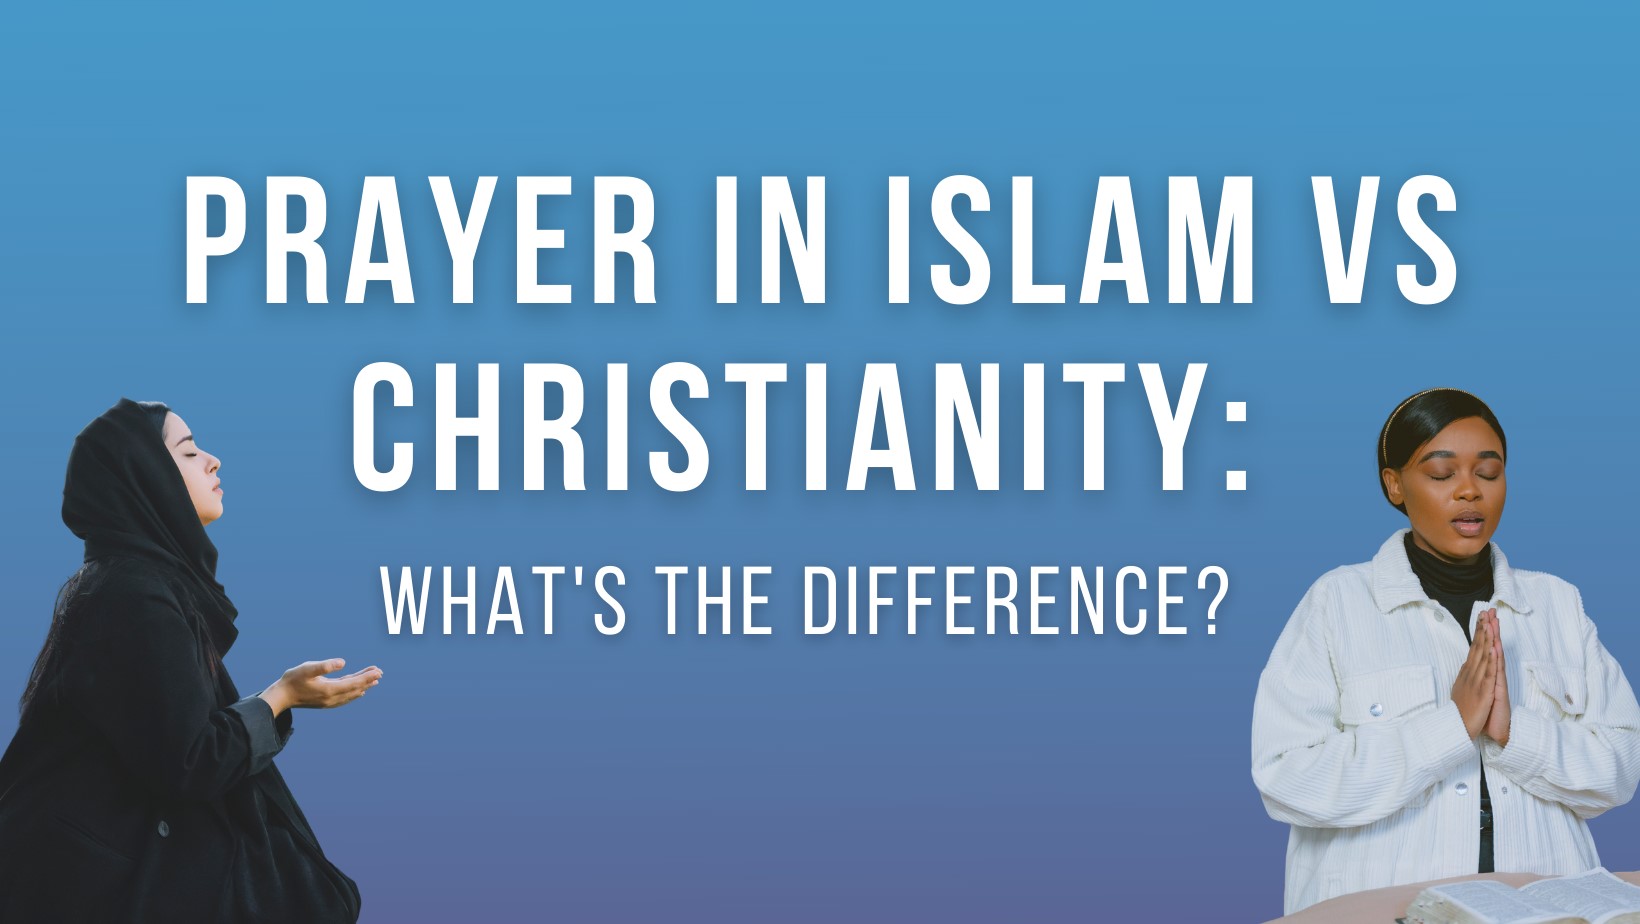 Prayer in Islam vs Christianity: What's the difference?